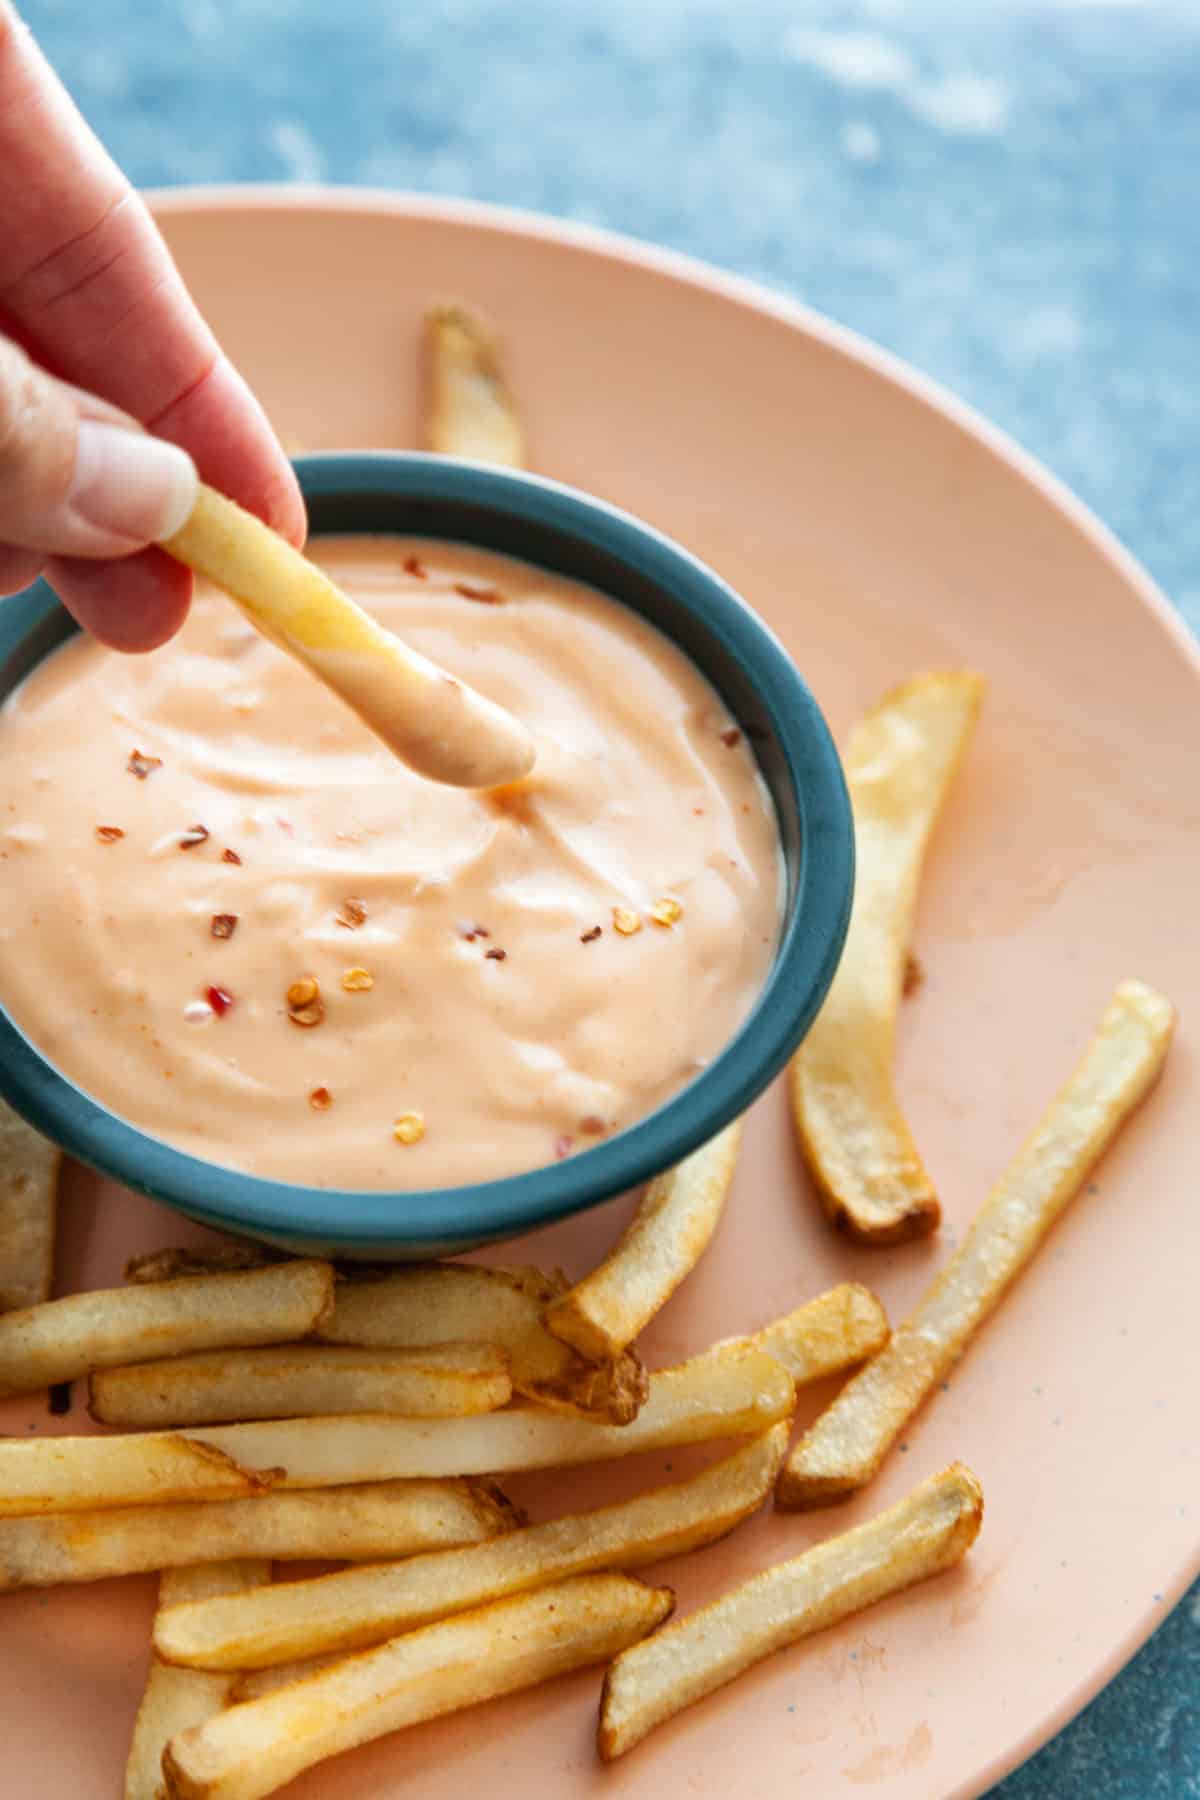 a hand dipping a french fry into sauce